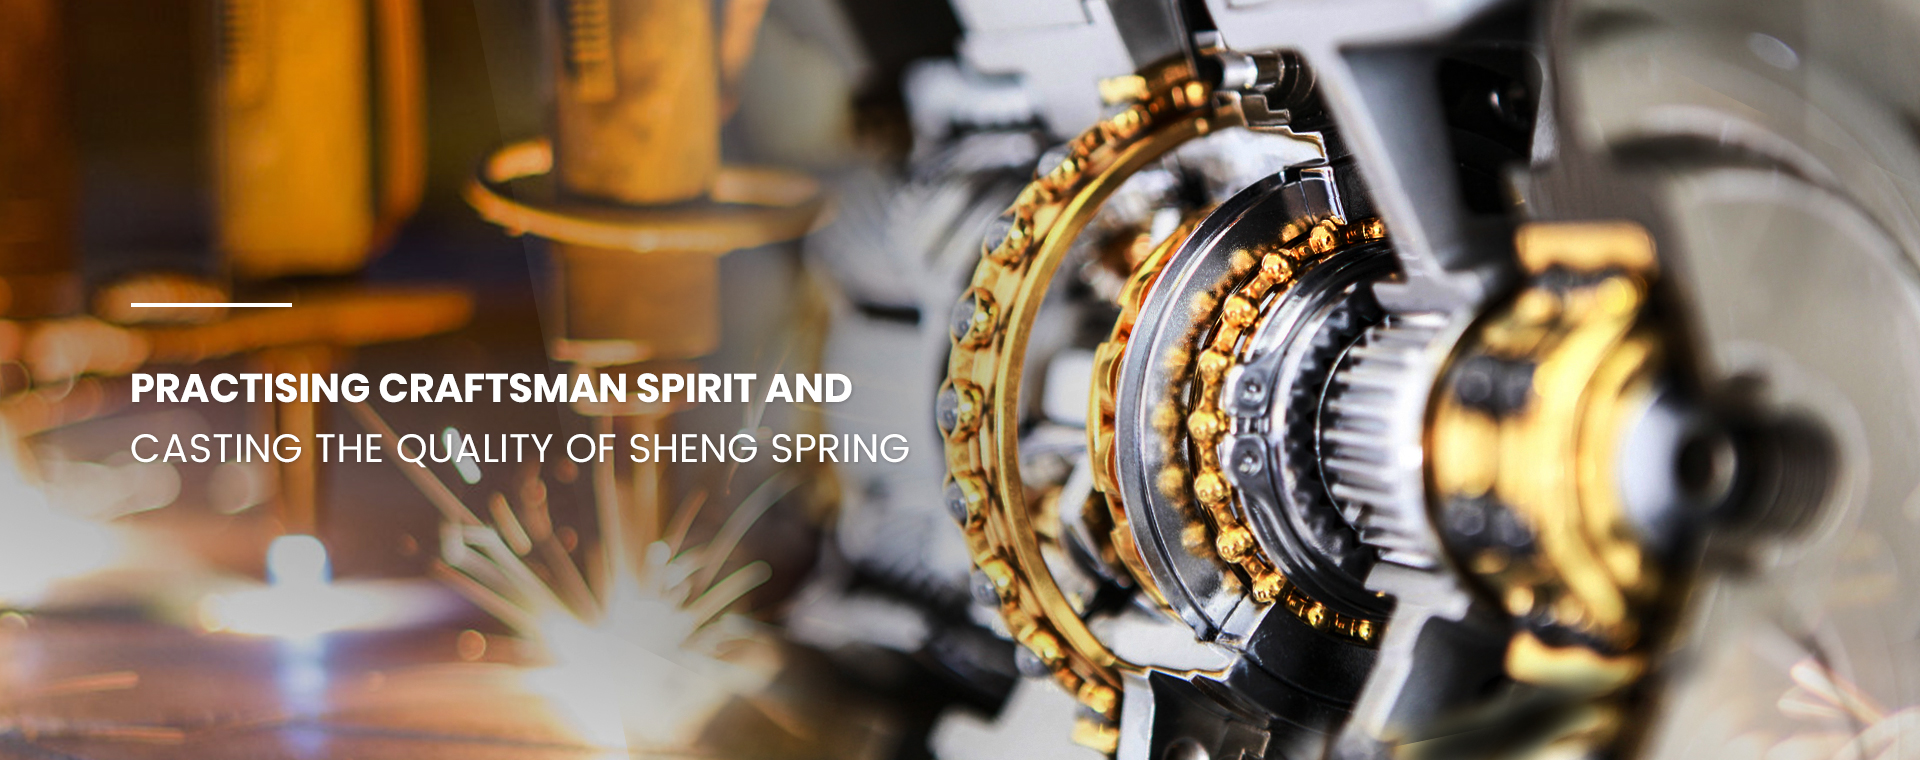 PRACTISING CRAFTSMAN SPIRIT AND CASTING THE QUALITY OF SHENG SPRING